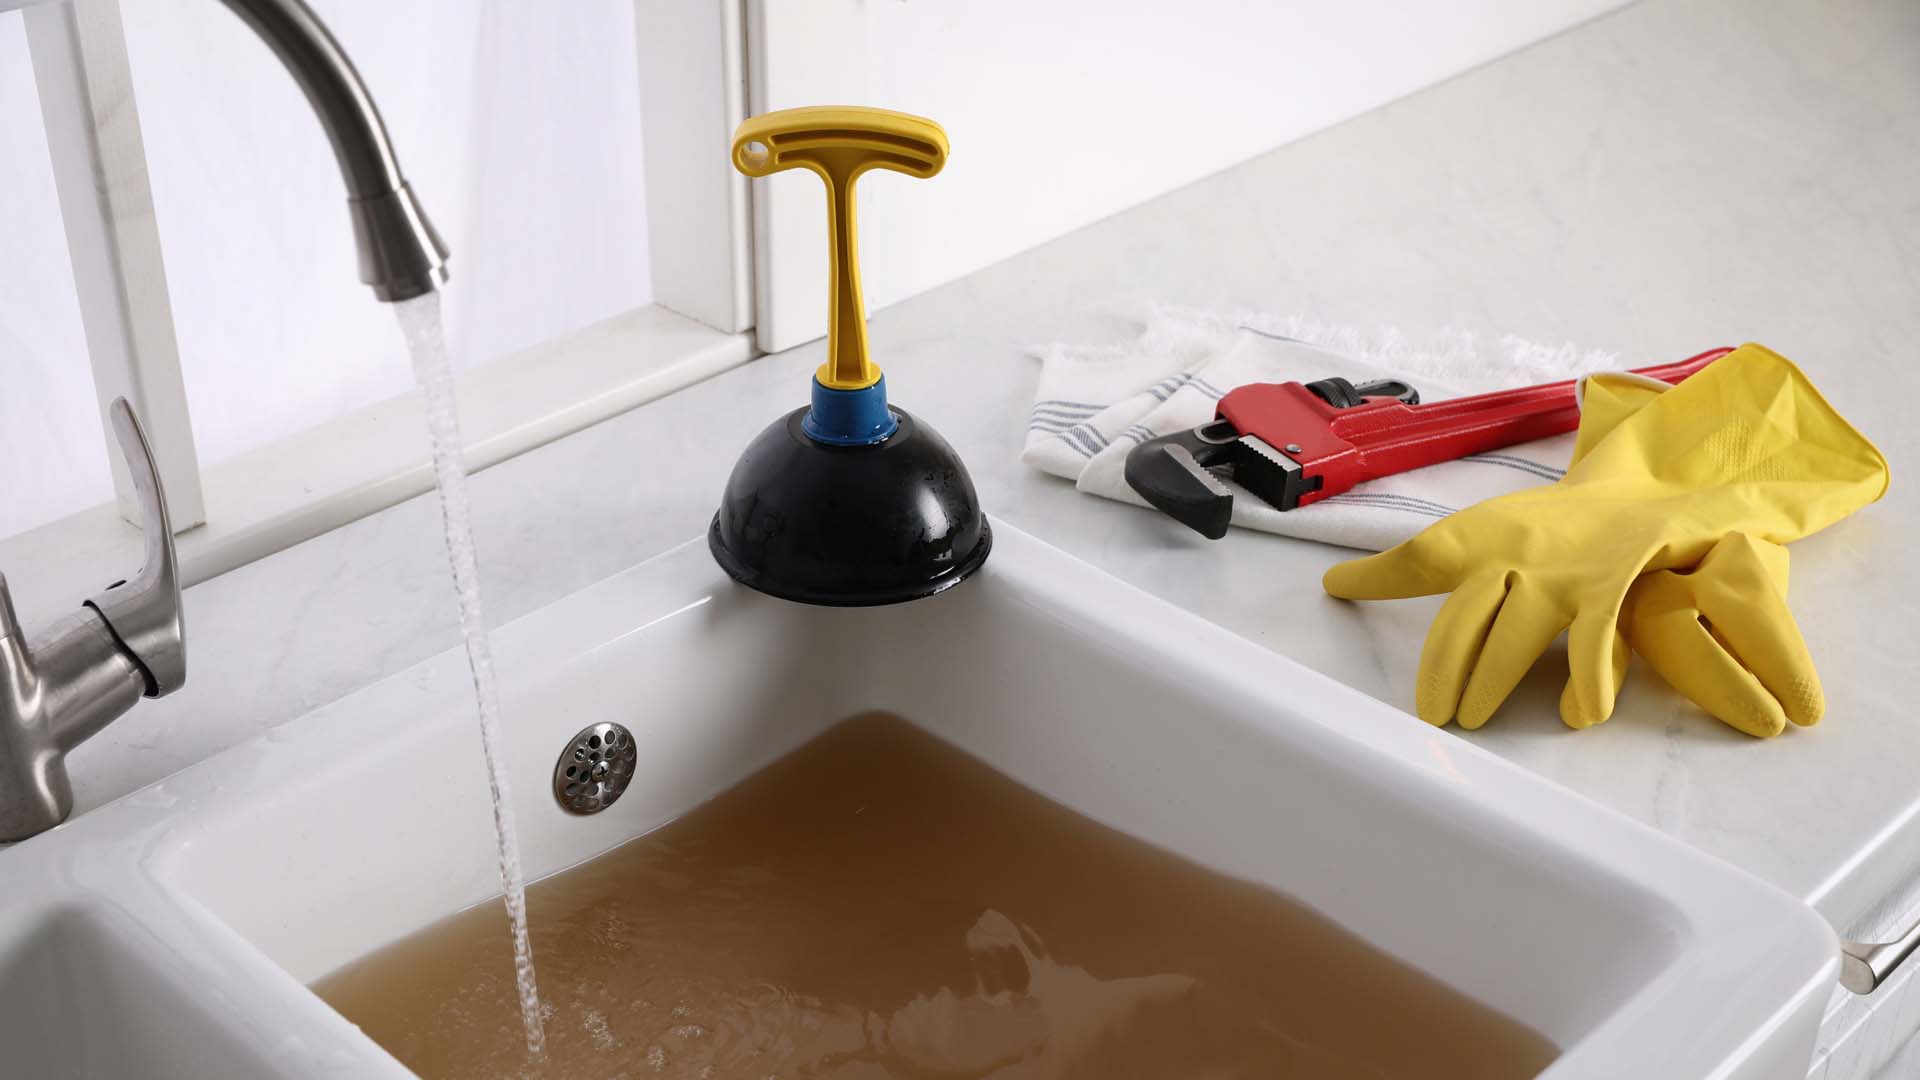 A blocked sink with a plunger and rubber gloves next to it